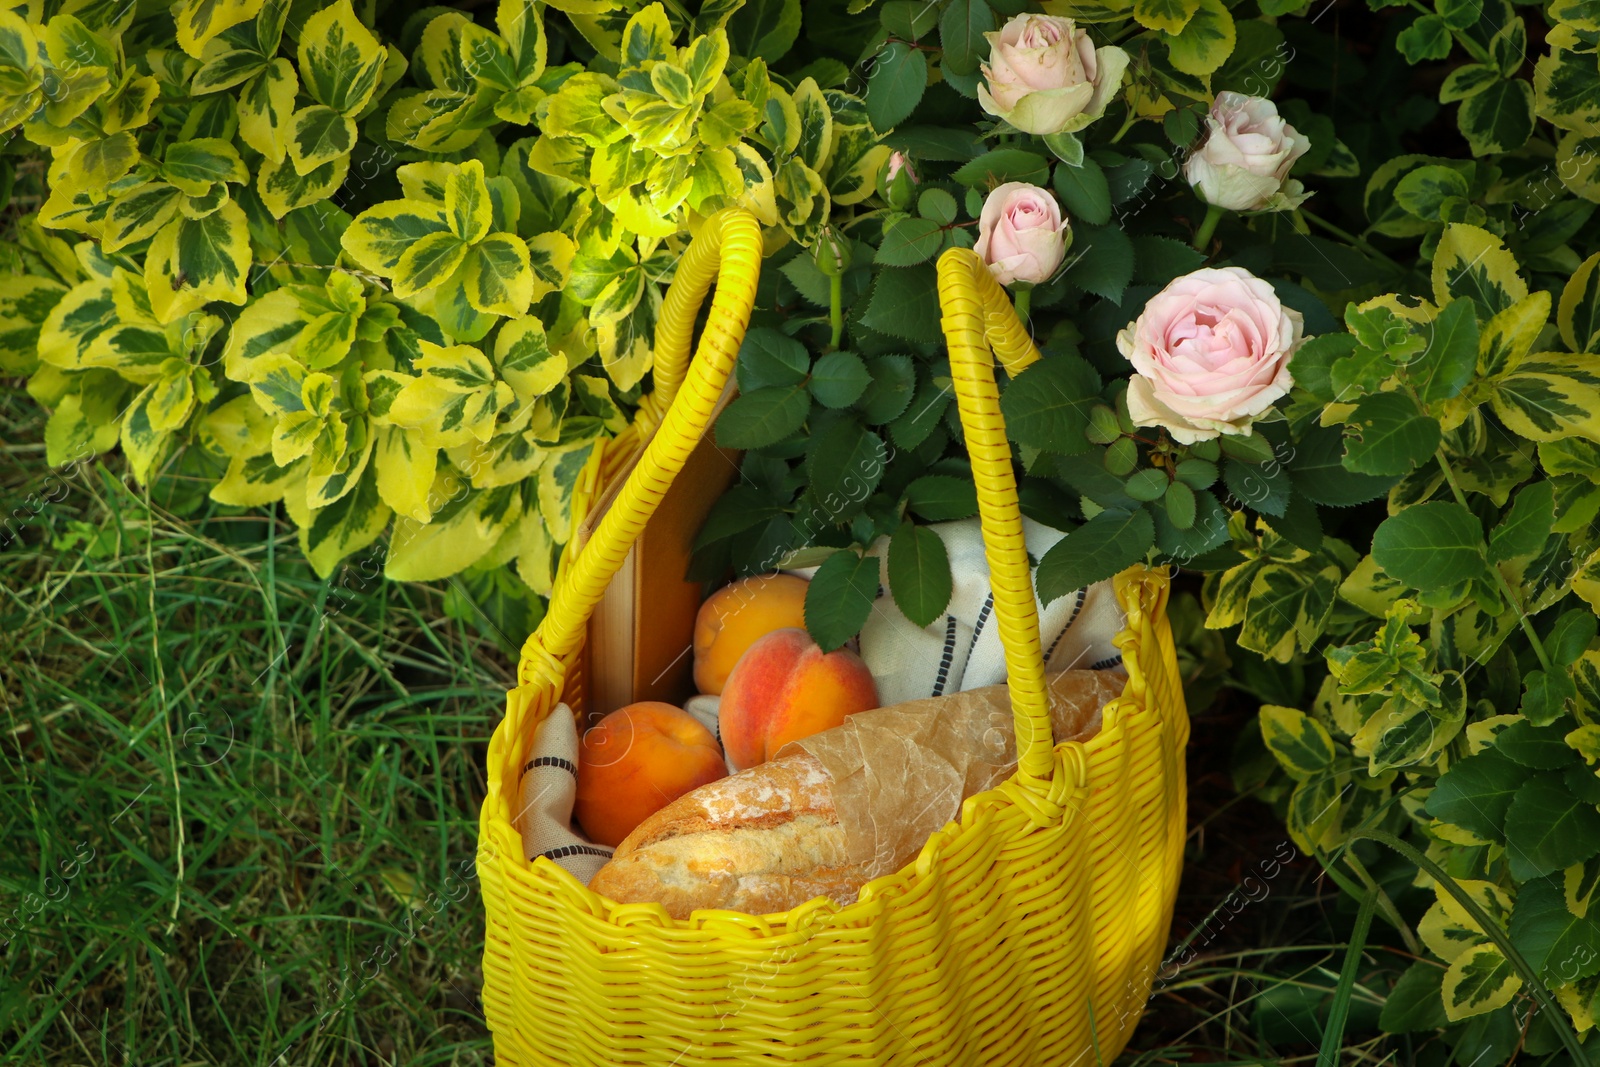 Photo of Yellow wicker bag with roses, peaches and baguette on green grass outdoors